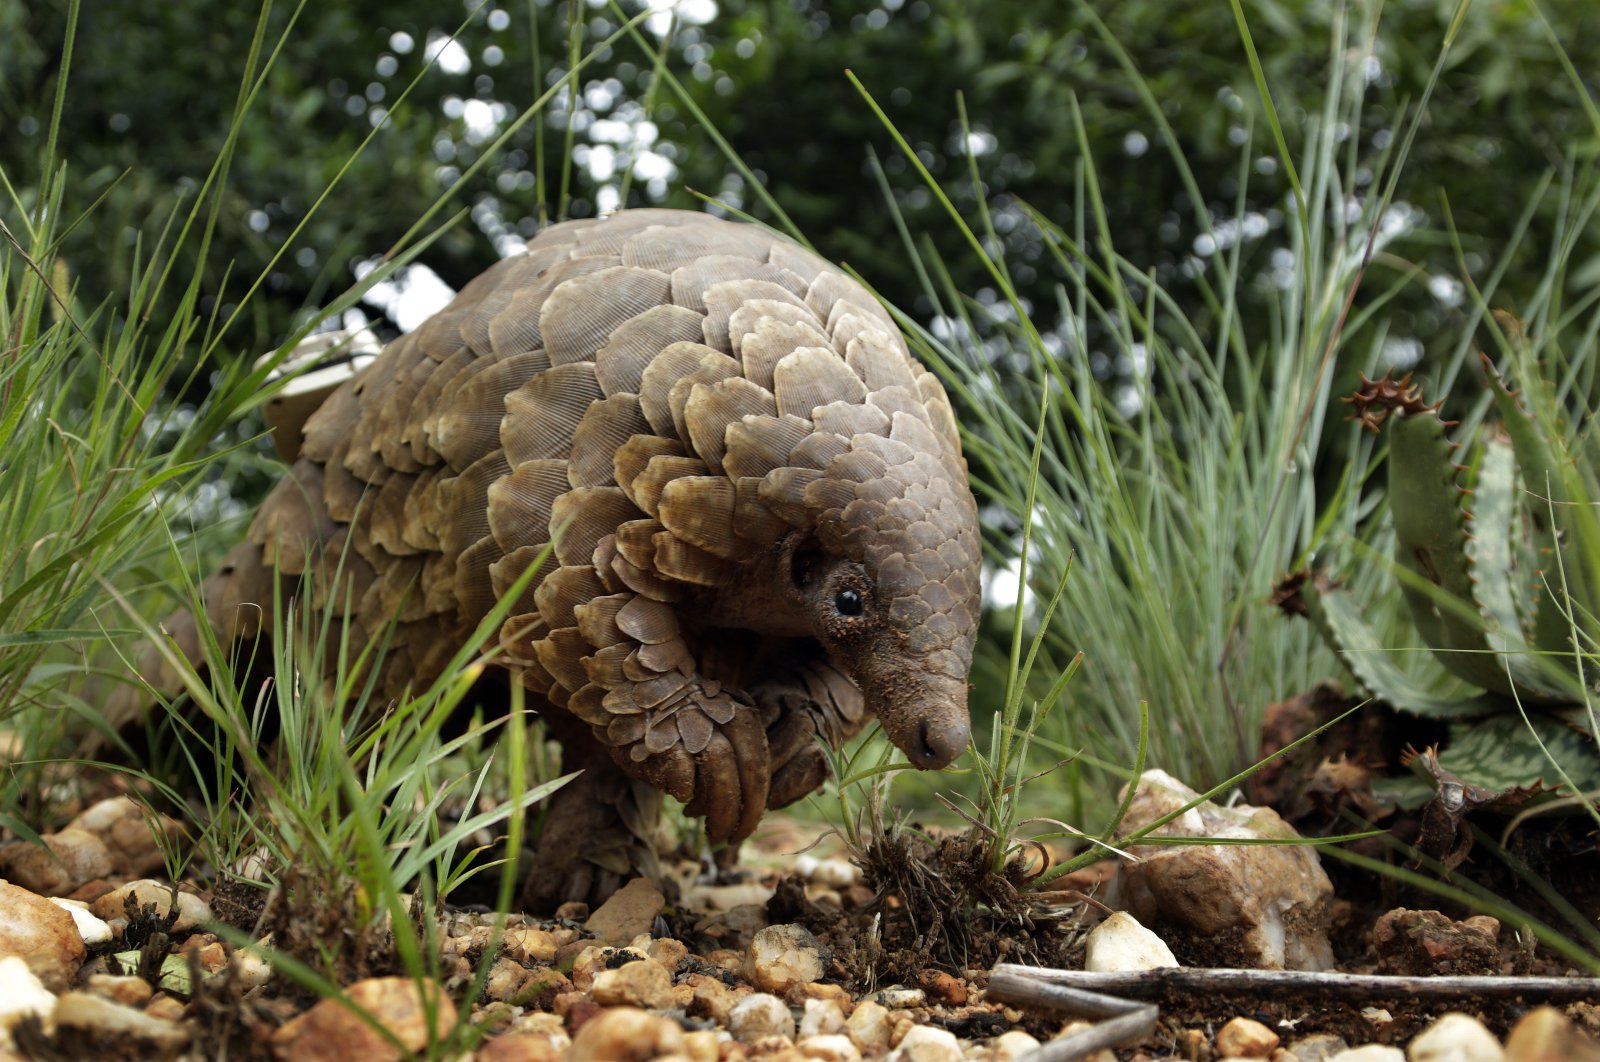 In this Feb. 15, 2019 file photo, a pangolin looks for food on private property in Johannesburg, South Africa. (AP Photo)